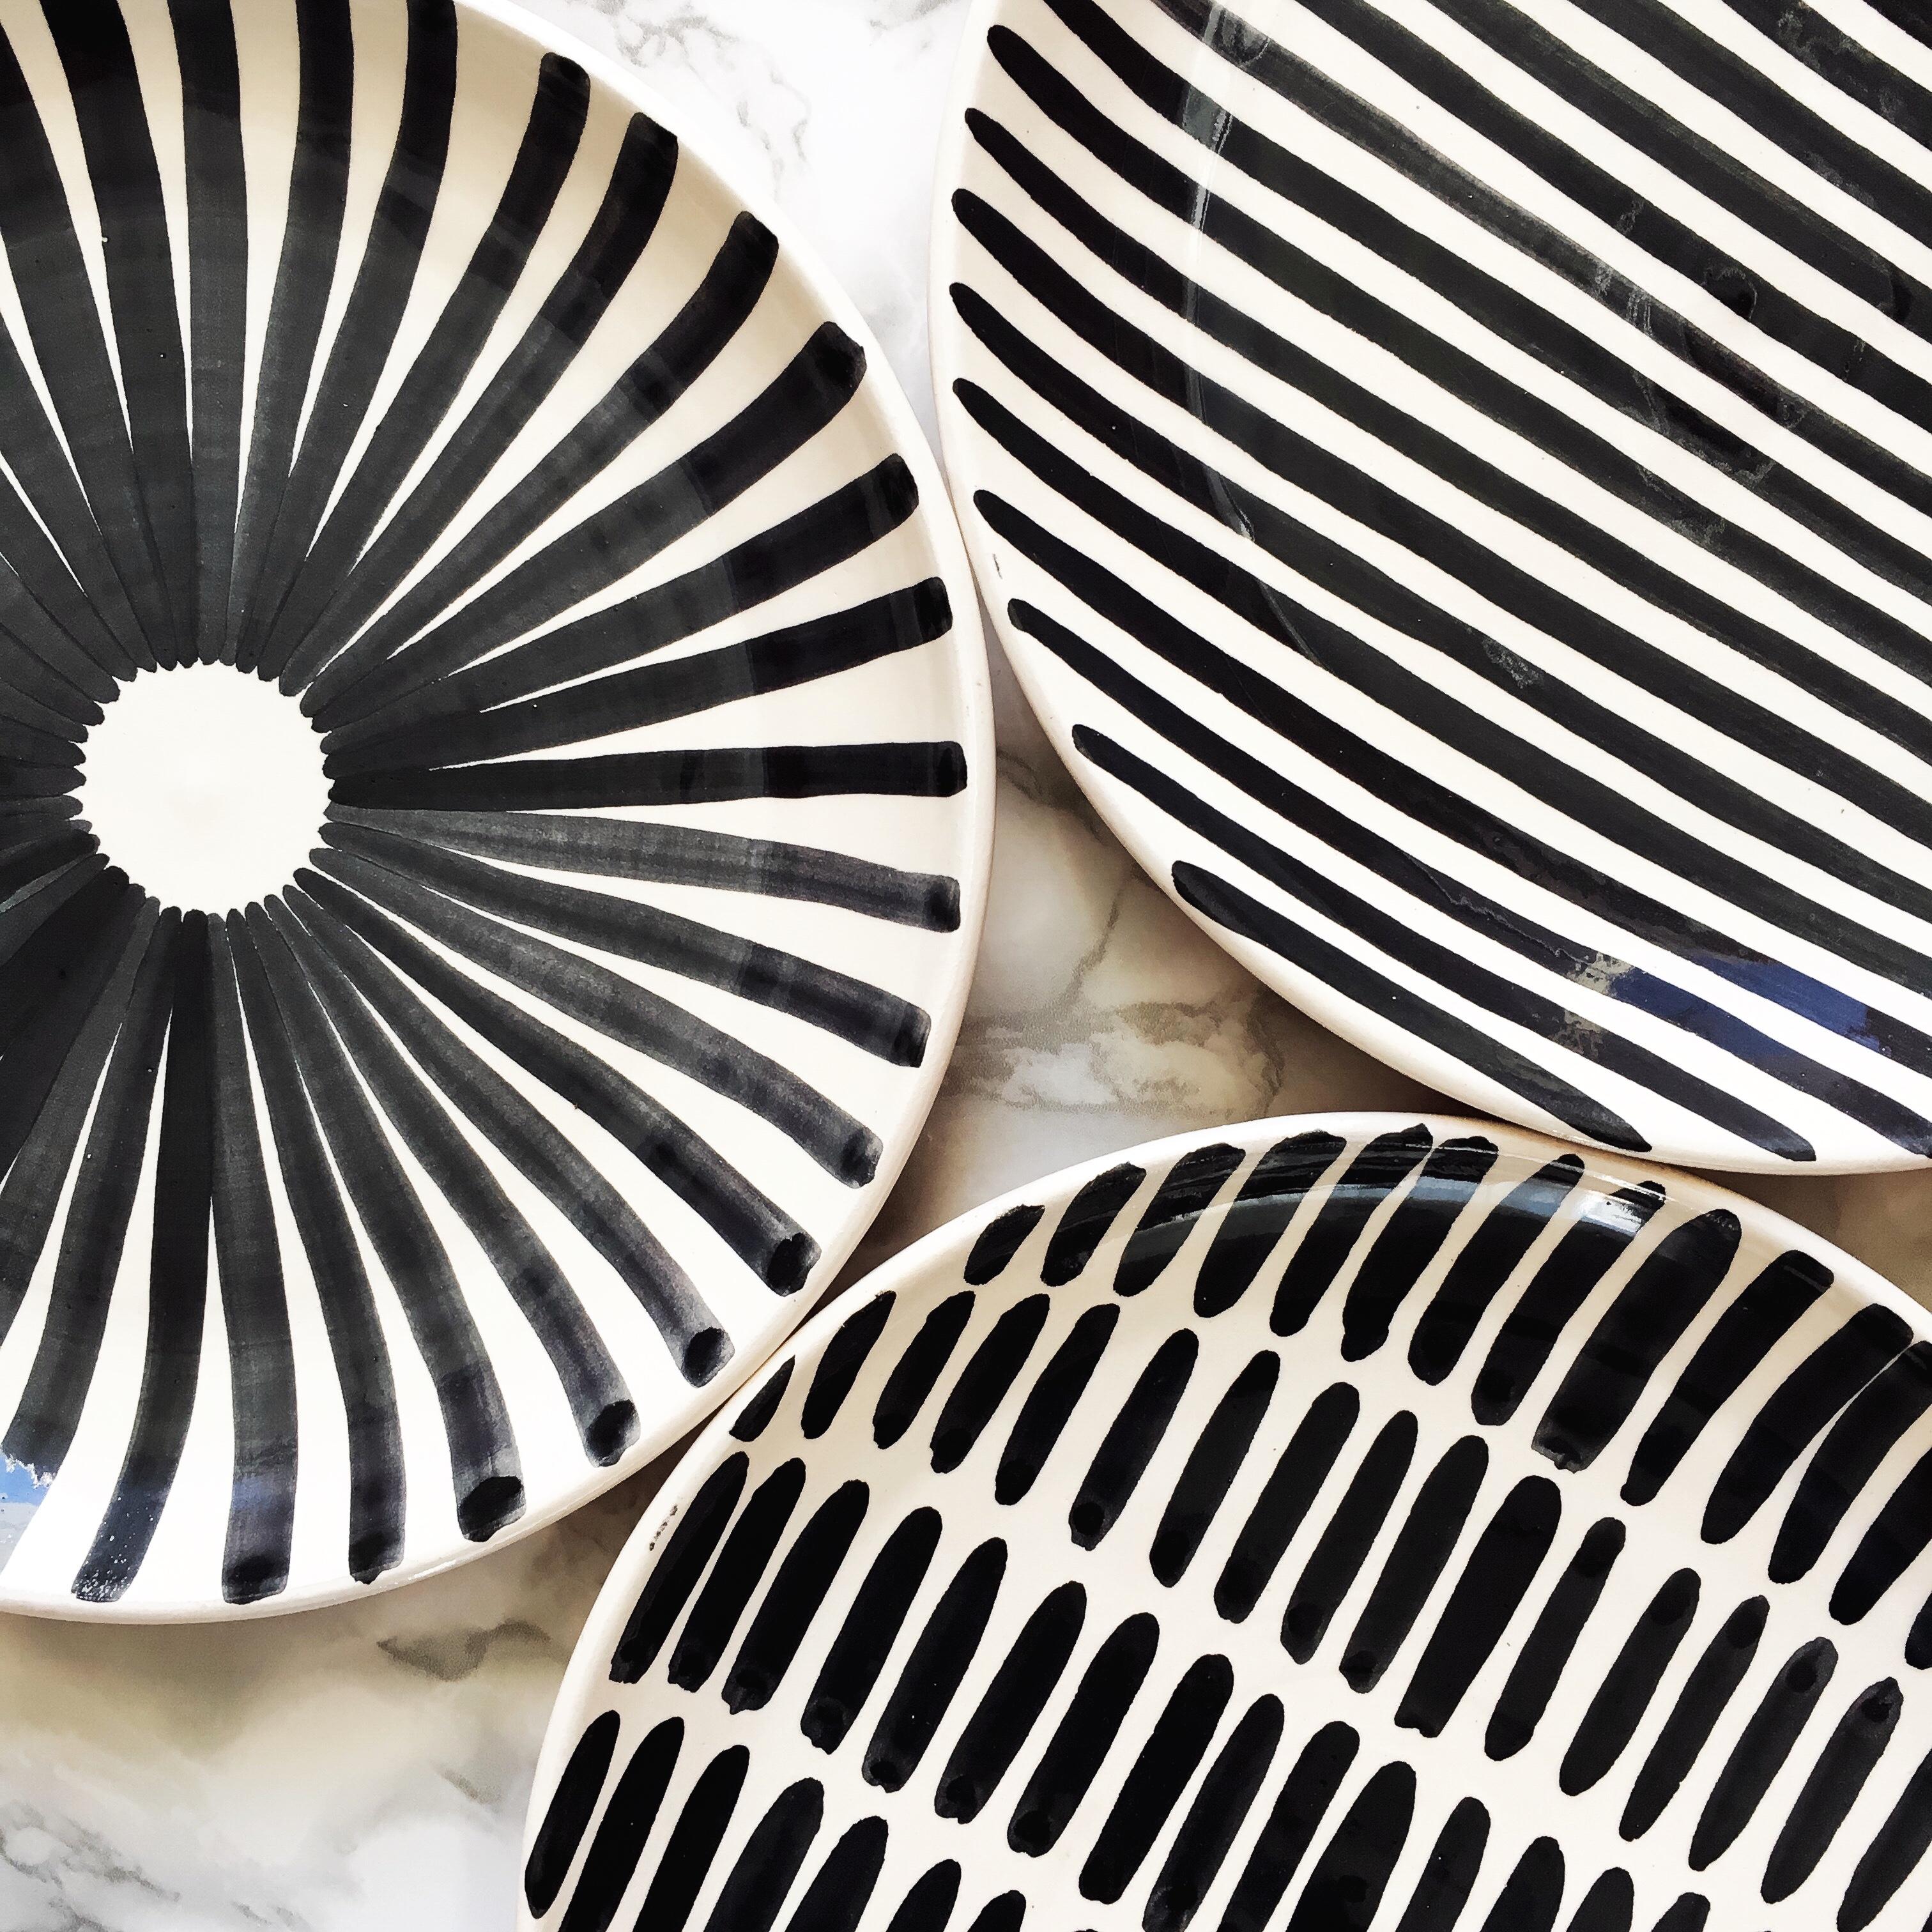 black and white striped charger plates